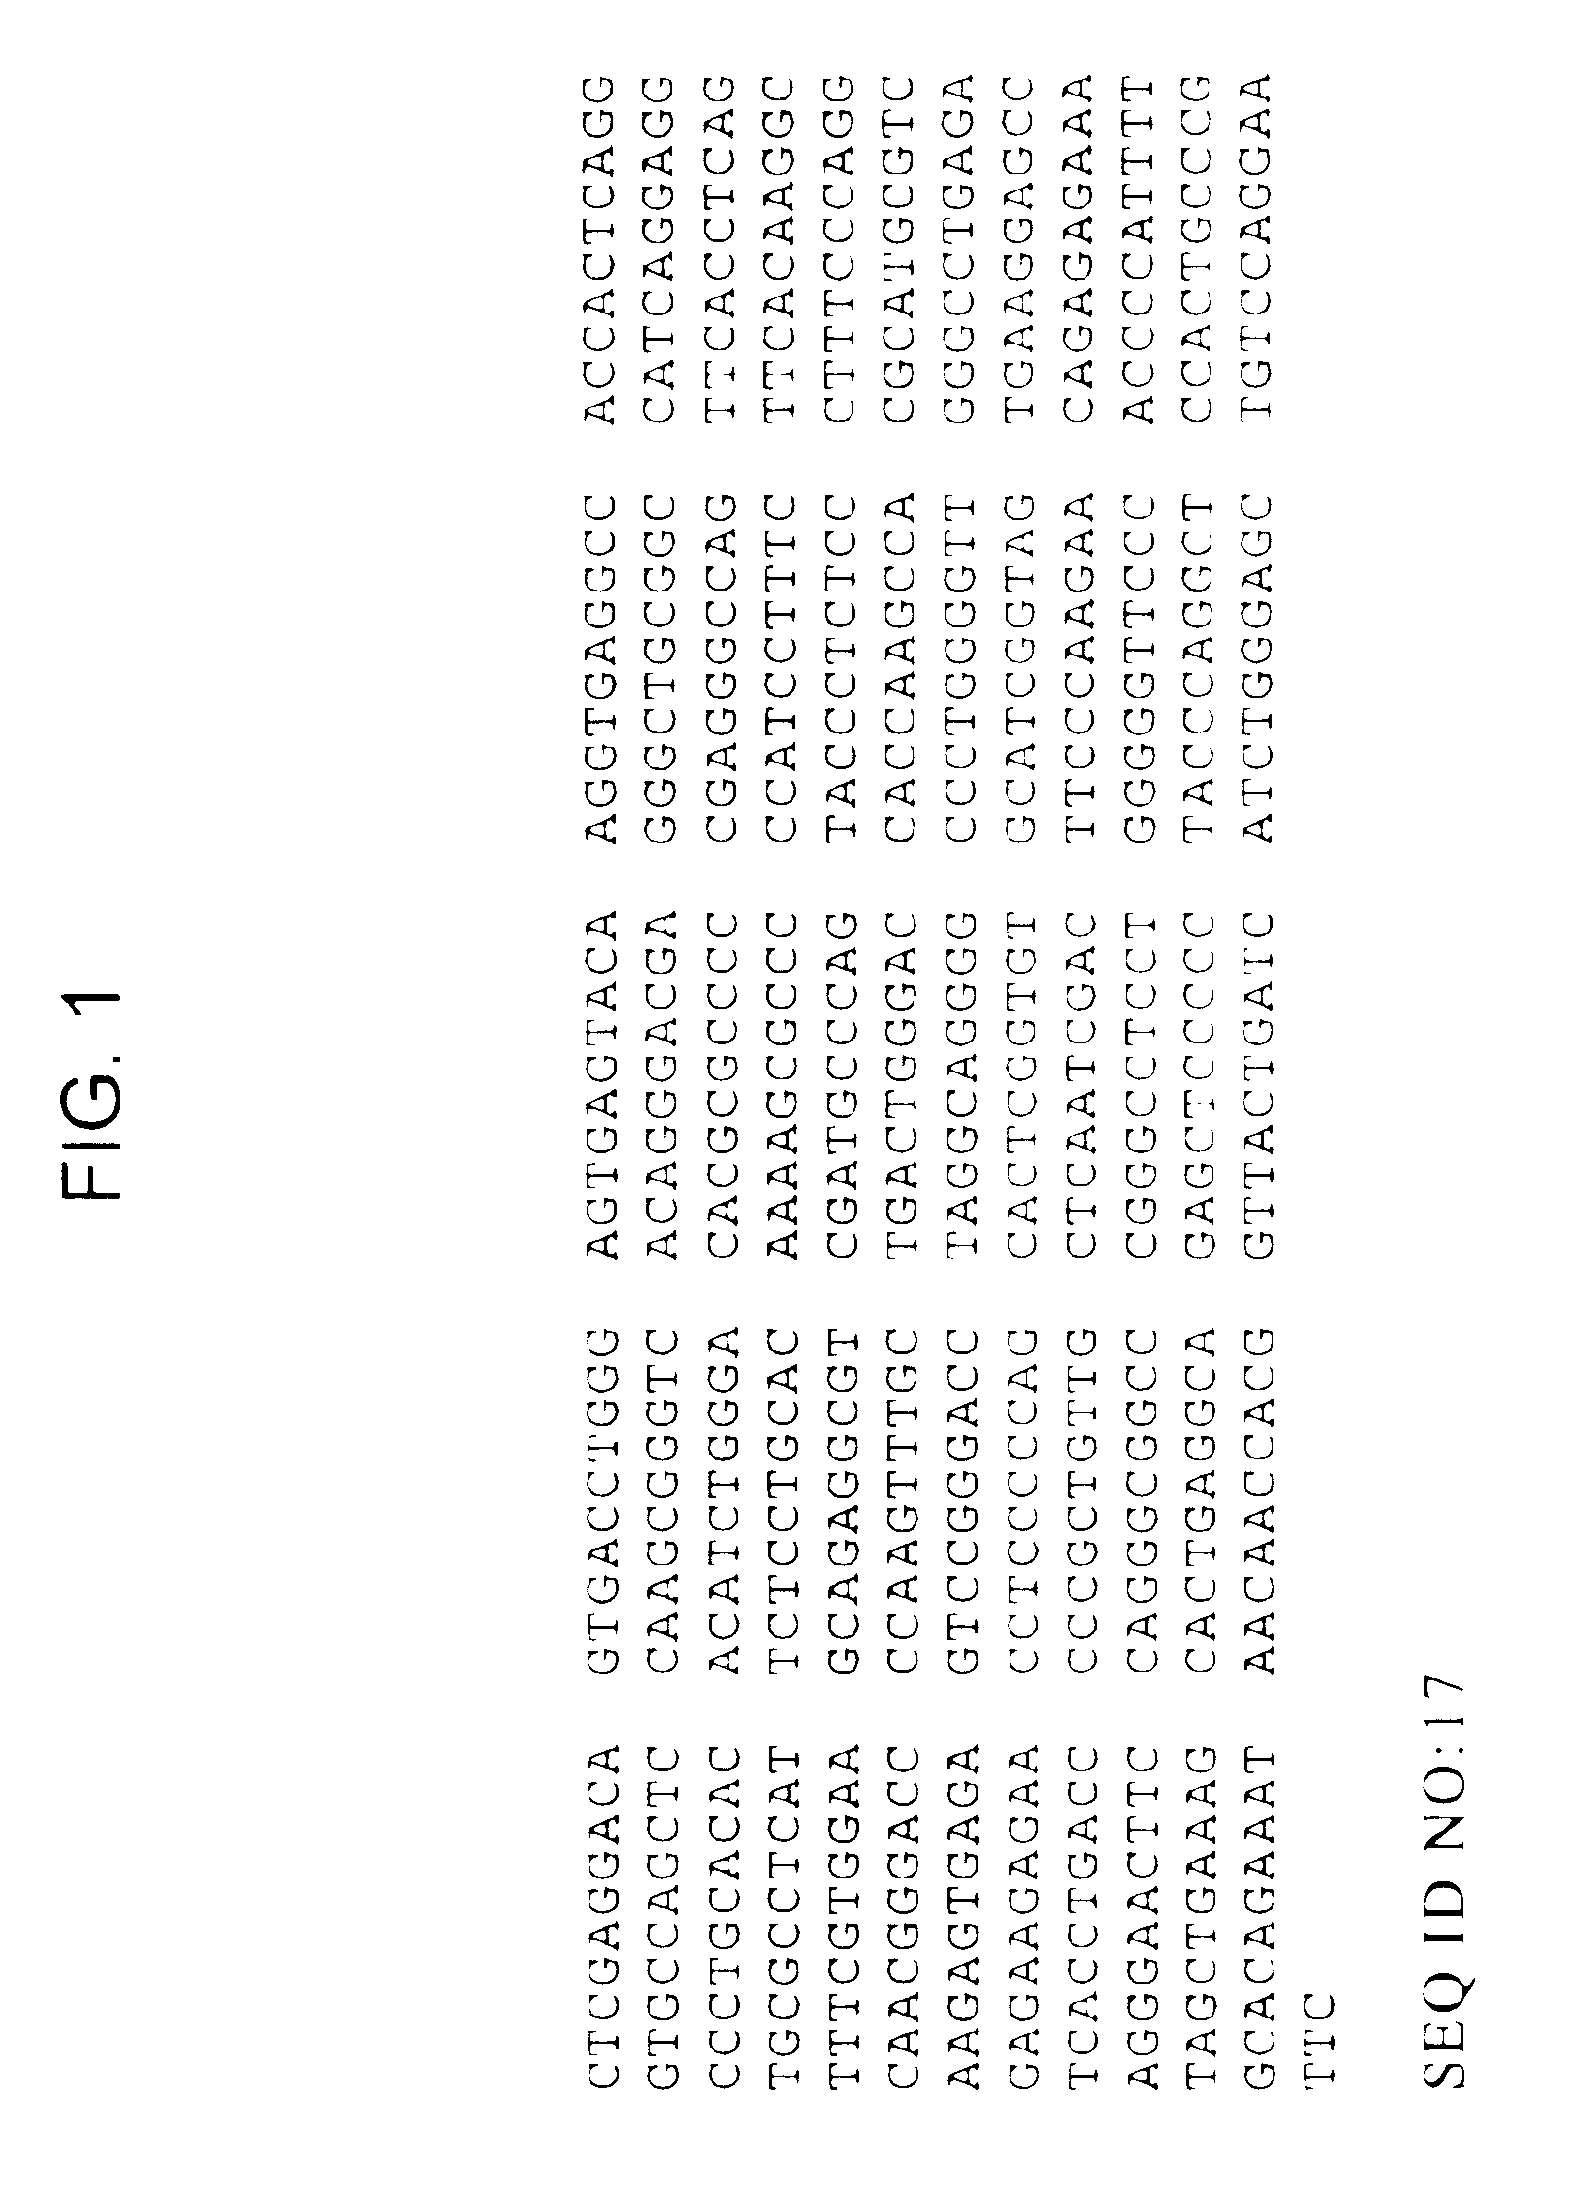 Methods of identifying compounds that modulate IL-4 receptor-mediated IgE synthesis utilizing a CLLD8 protein